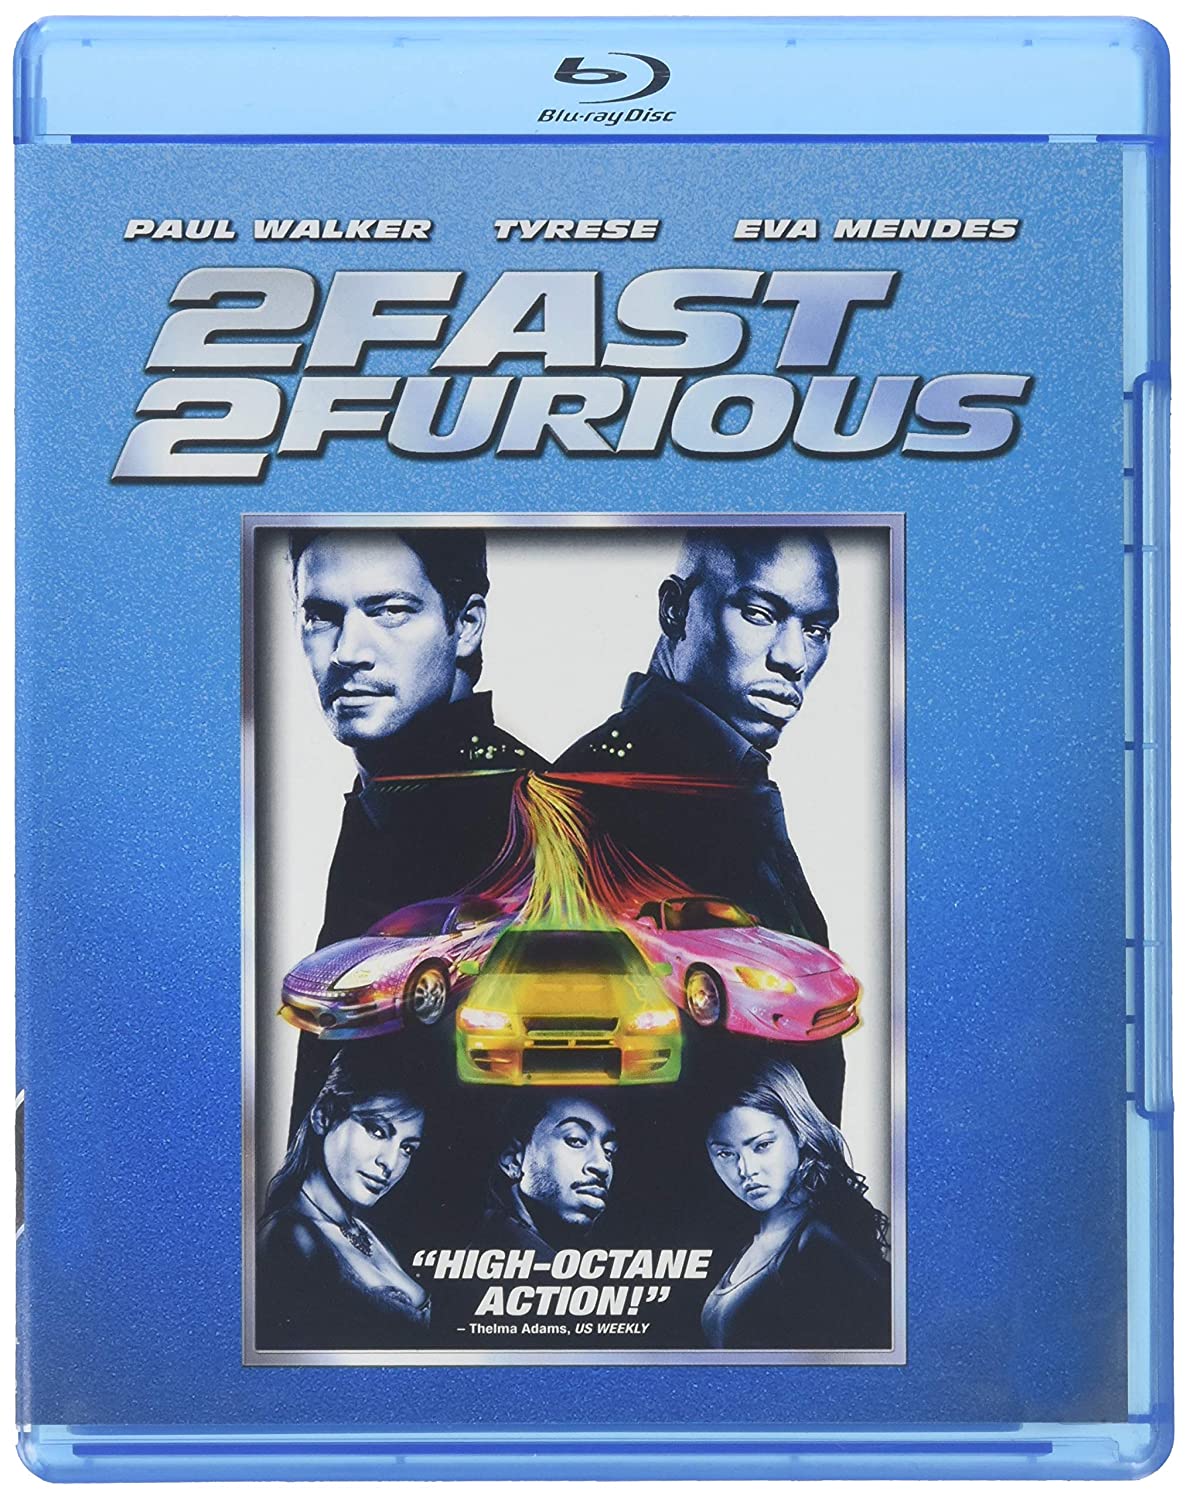 2 Fast 2 Furious - Darkside Records